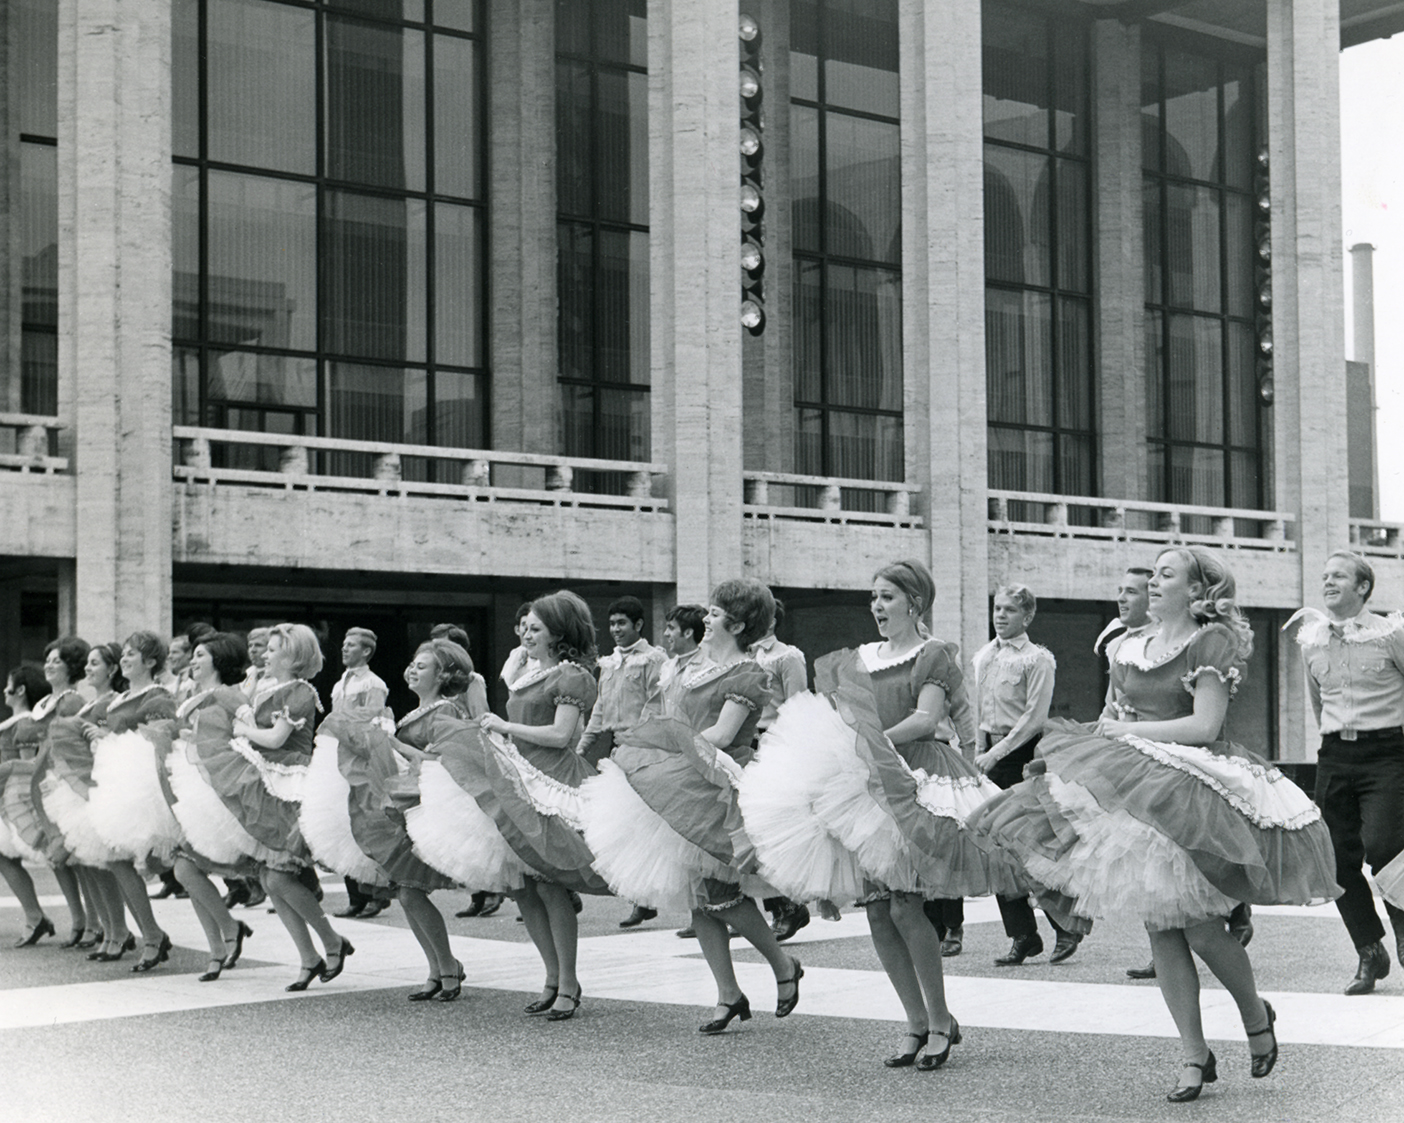 BYU folk dancers dance on broadway street in this black and white image from the 1970s.